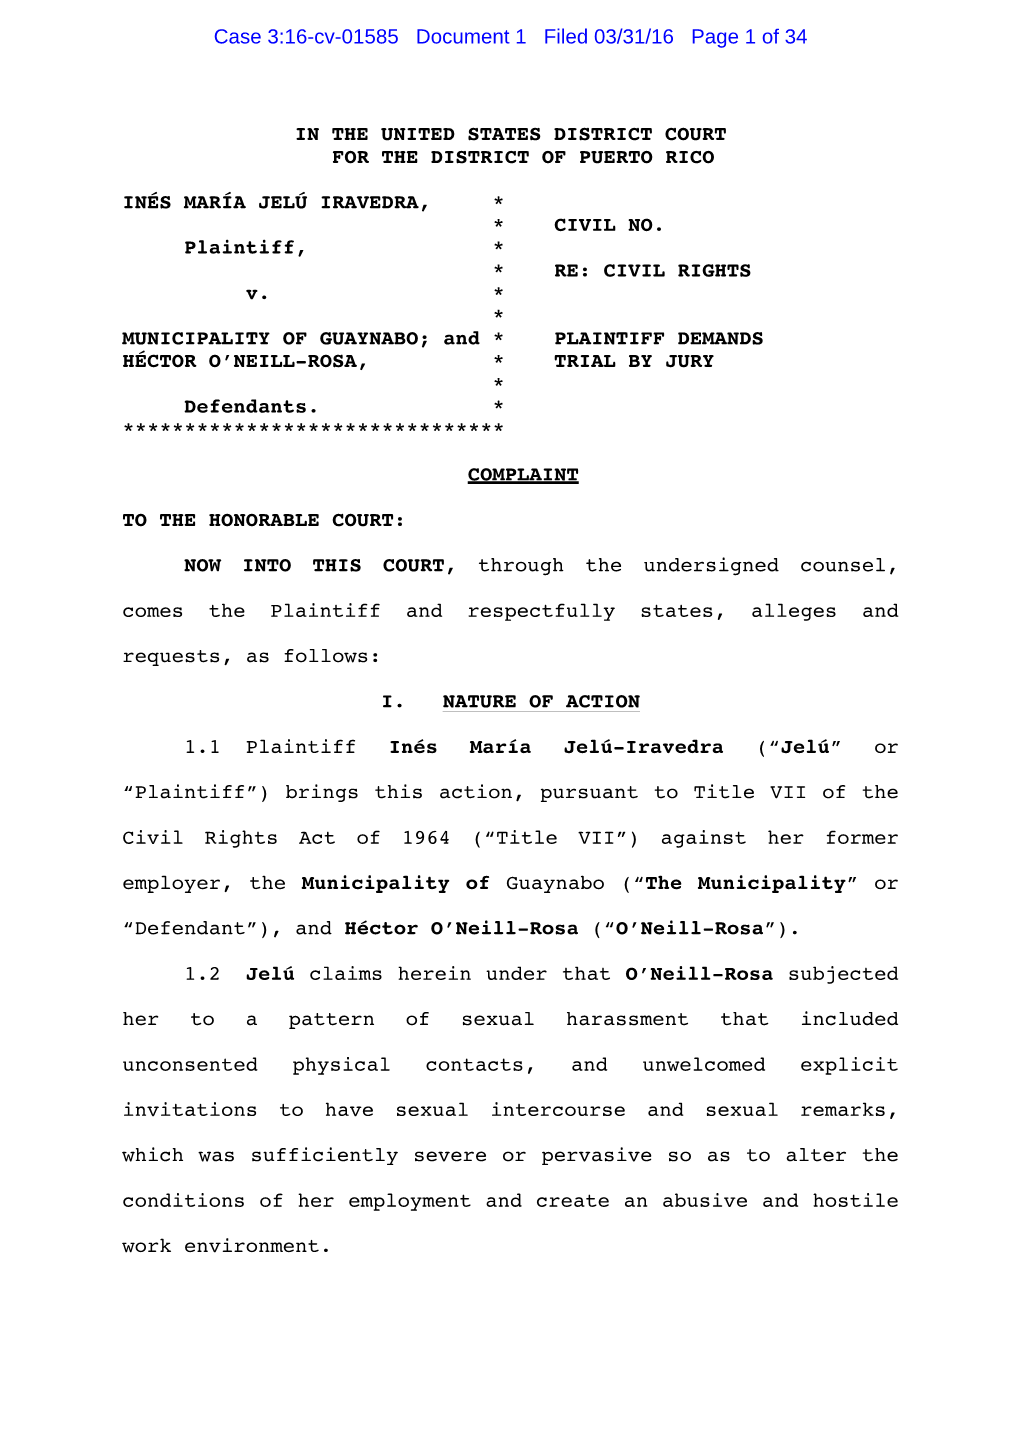 Case 3:16-Cv-01585 Document 1 Filed 03/31/16 Page 1 of 34